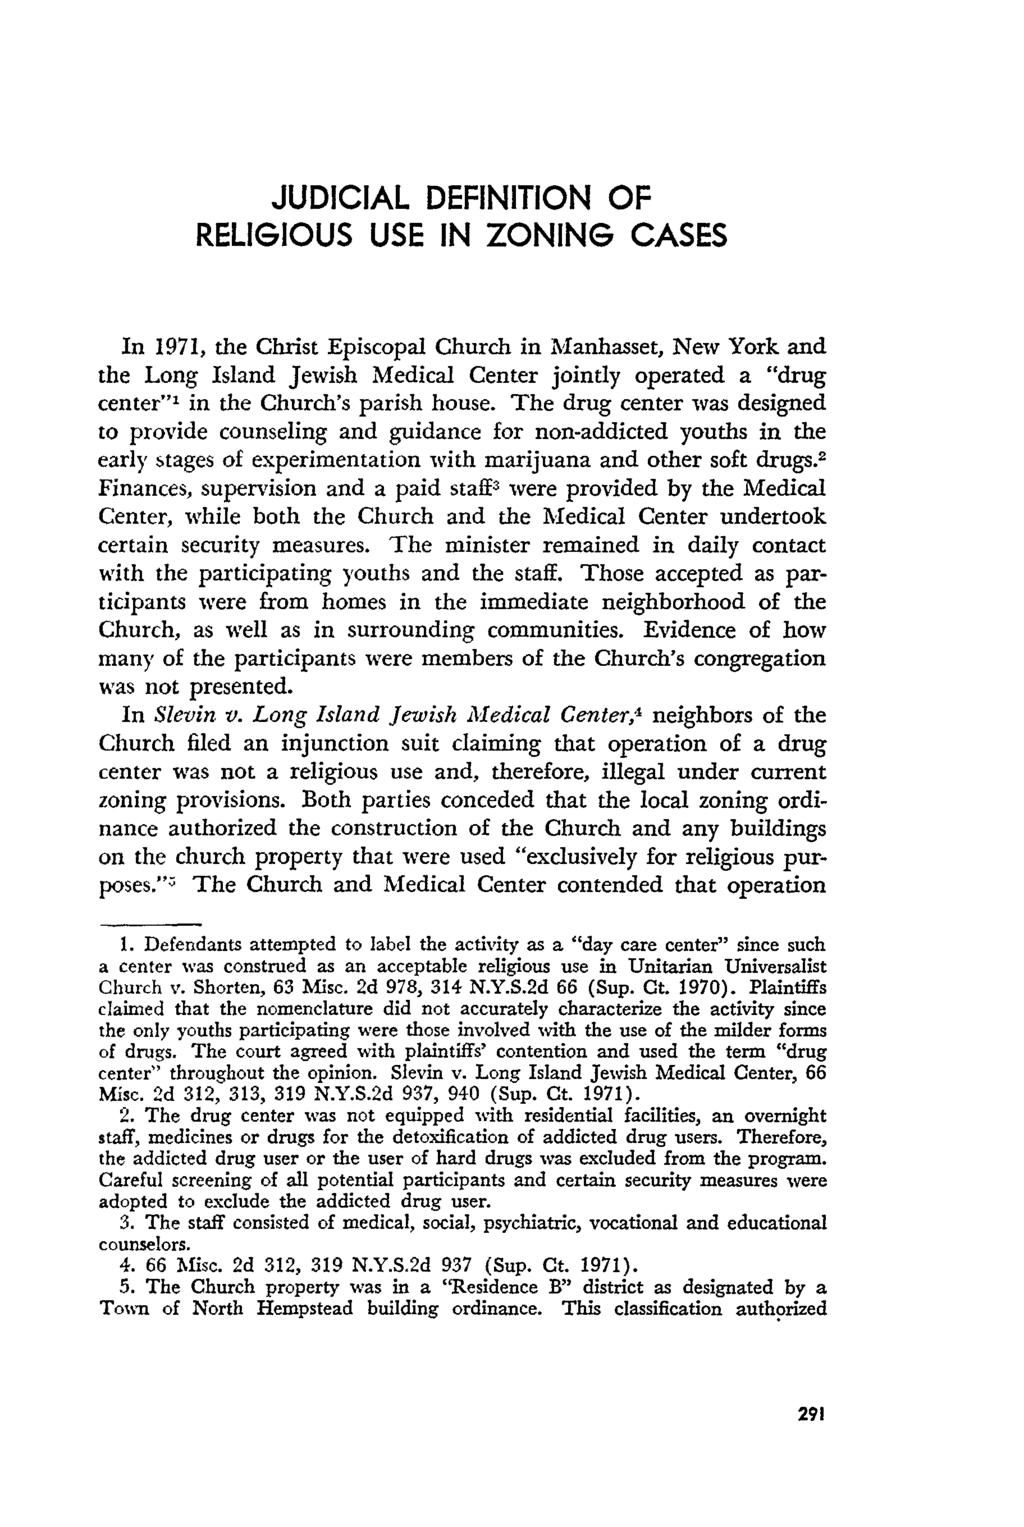 JUDICIAL DEFINITION OF RELIGIOUS USE IN ZONING CASES In 1971, the Christ Episcopal Church in Manhasset, New York and the Long Island Jewish Medical Center jointly operated a "drug center" 1 in the